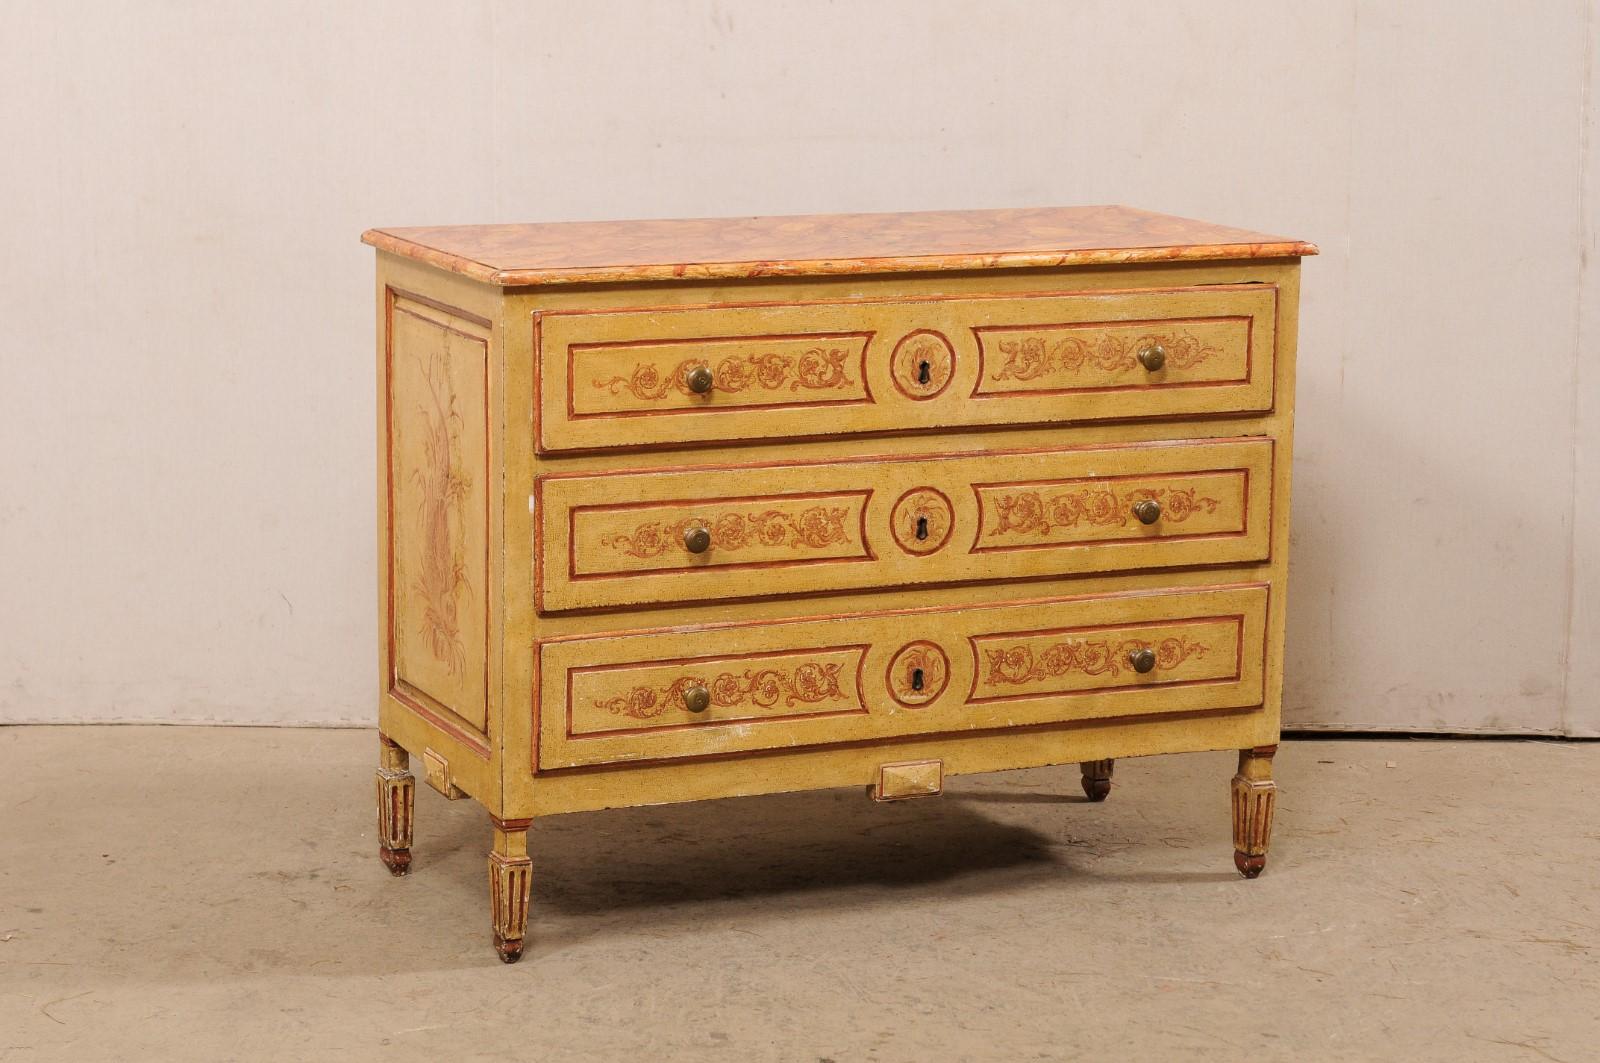 An Italian three-drawer chest, with its original artistic hand-painted finish, from the early 19th century. This antique commode from Italy has its original artisan painted finish which includes a faux-marbled top, drawer fronts outlining the panel